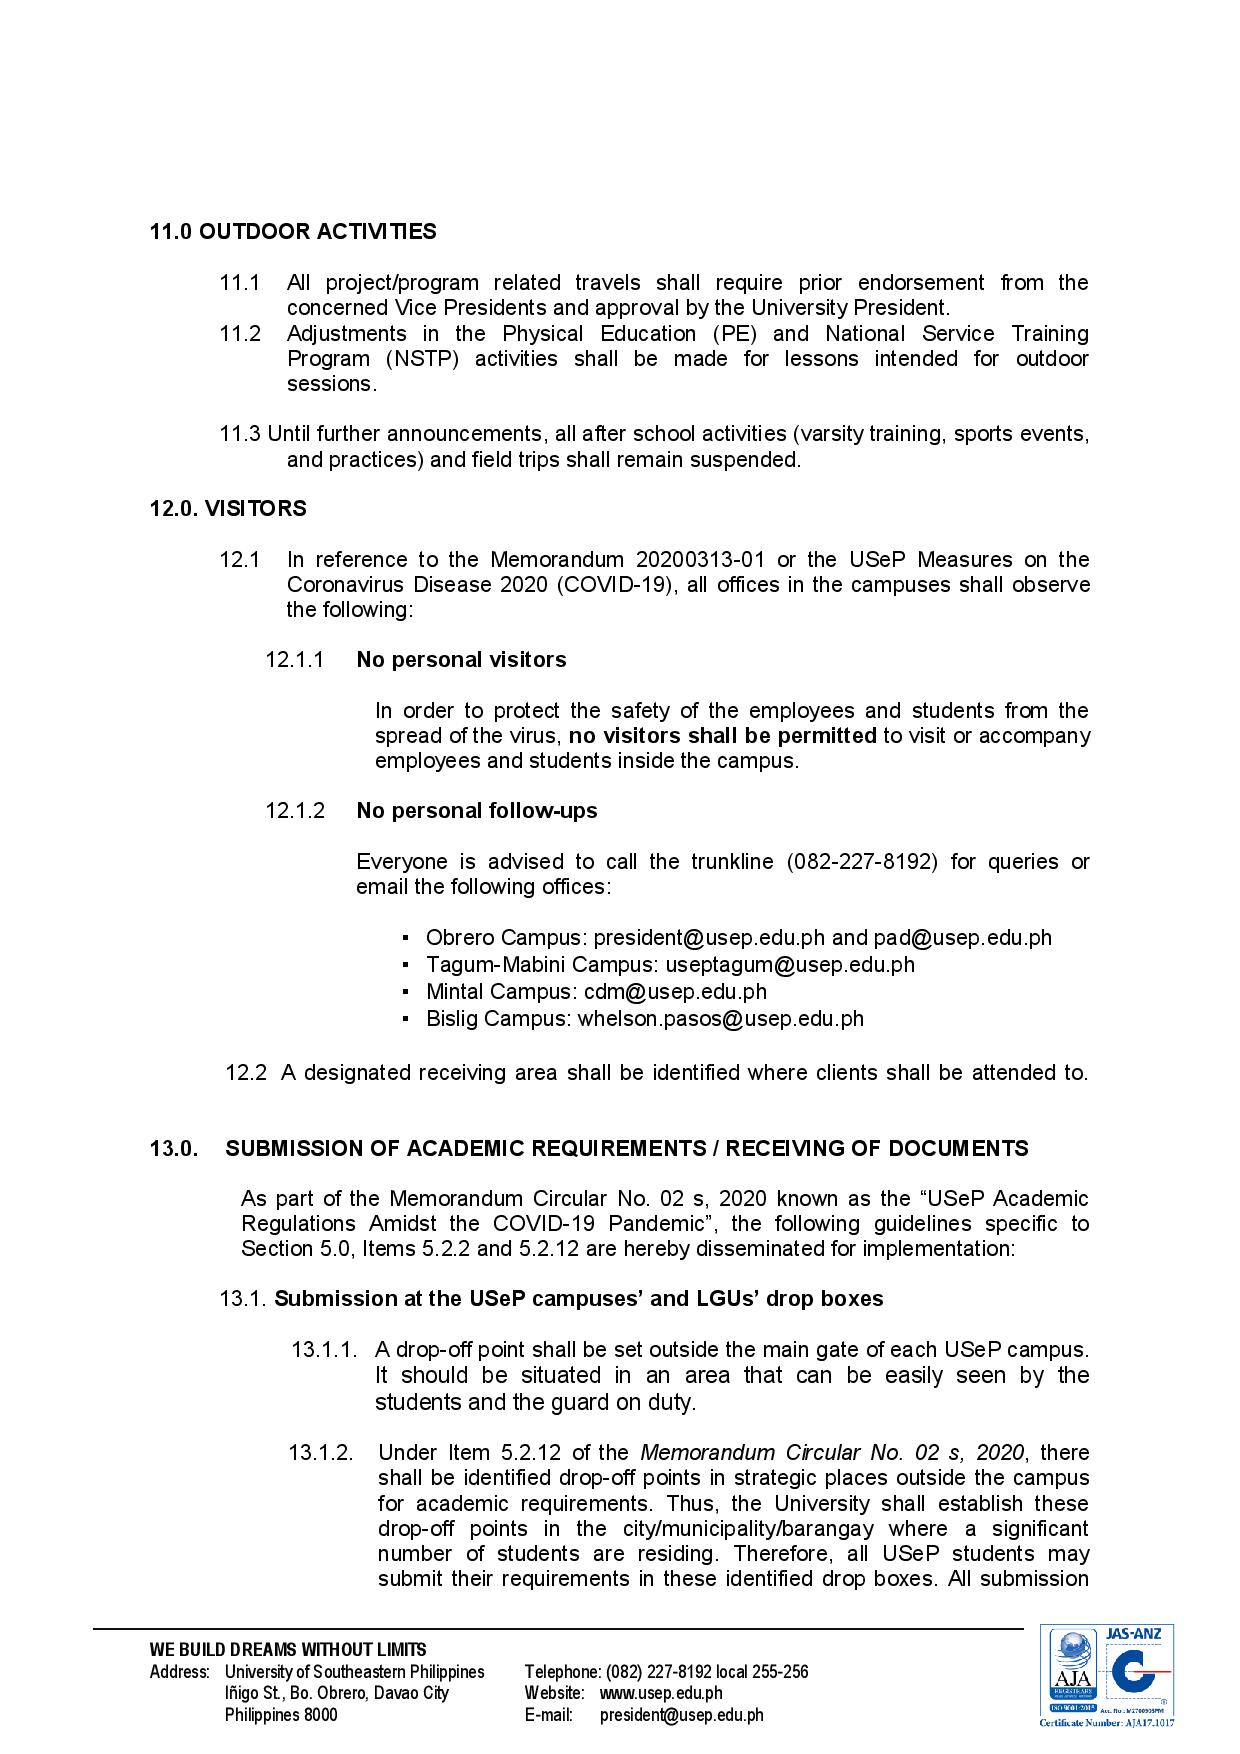 mc-03-s-2020-memorandum-circular-on-administrative-guidelines-upon-resumption-of-work-and-conduct-of-classes-under-the-new-normal-condition-1-page-011